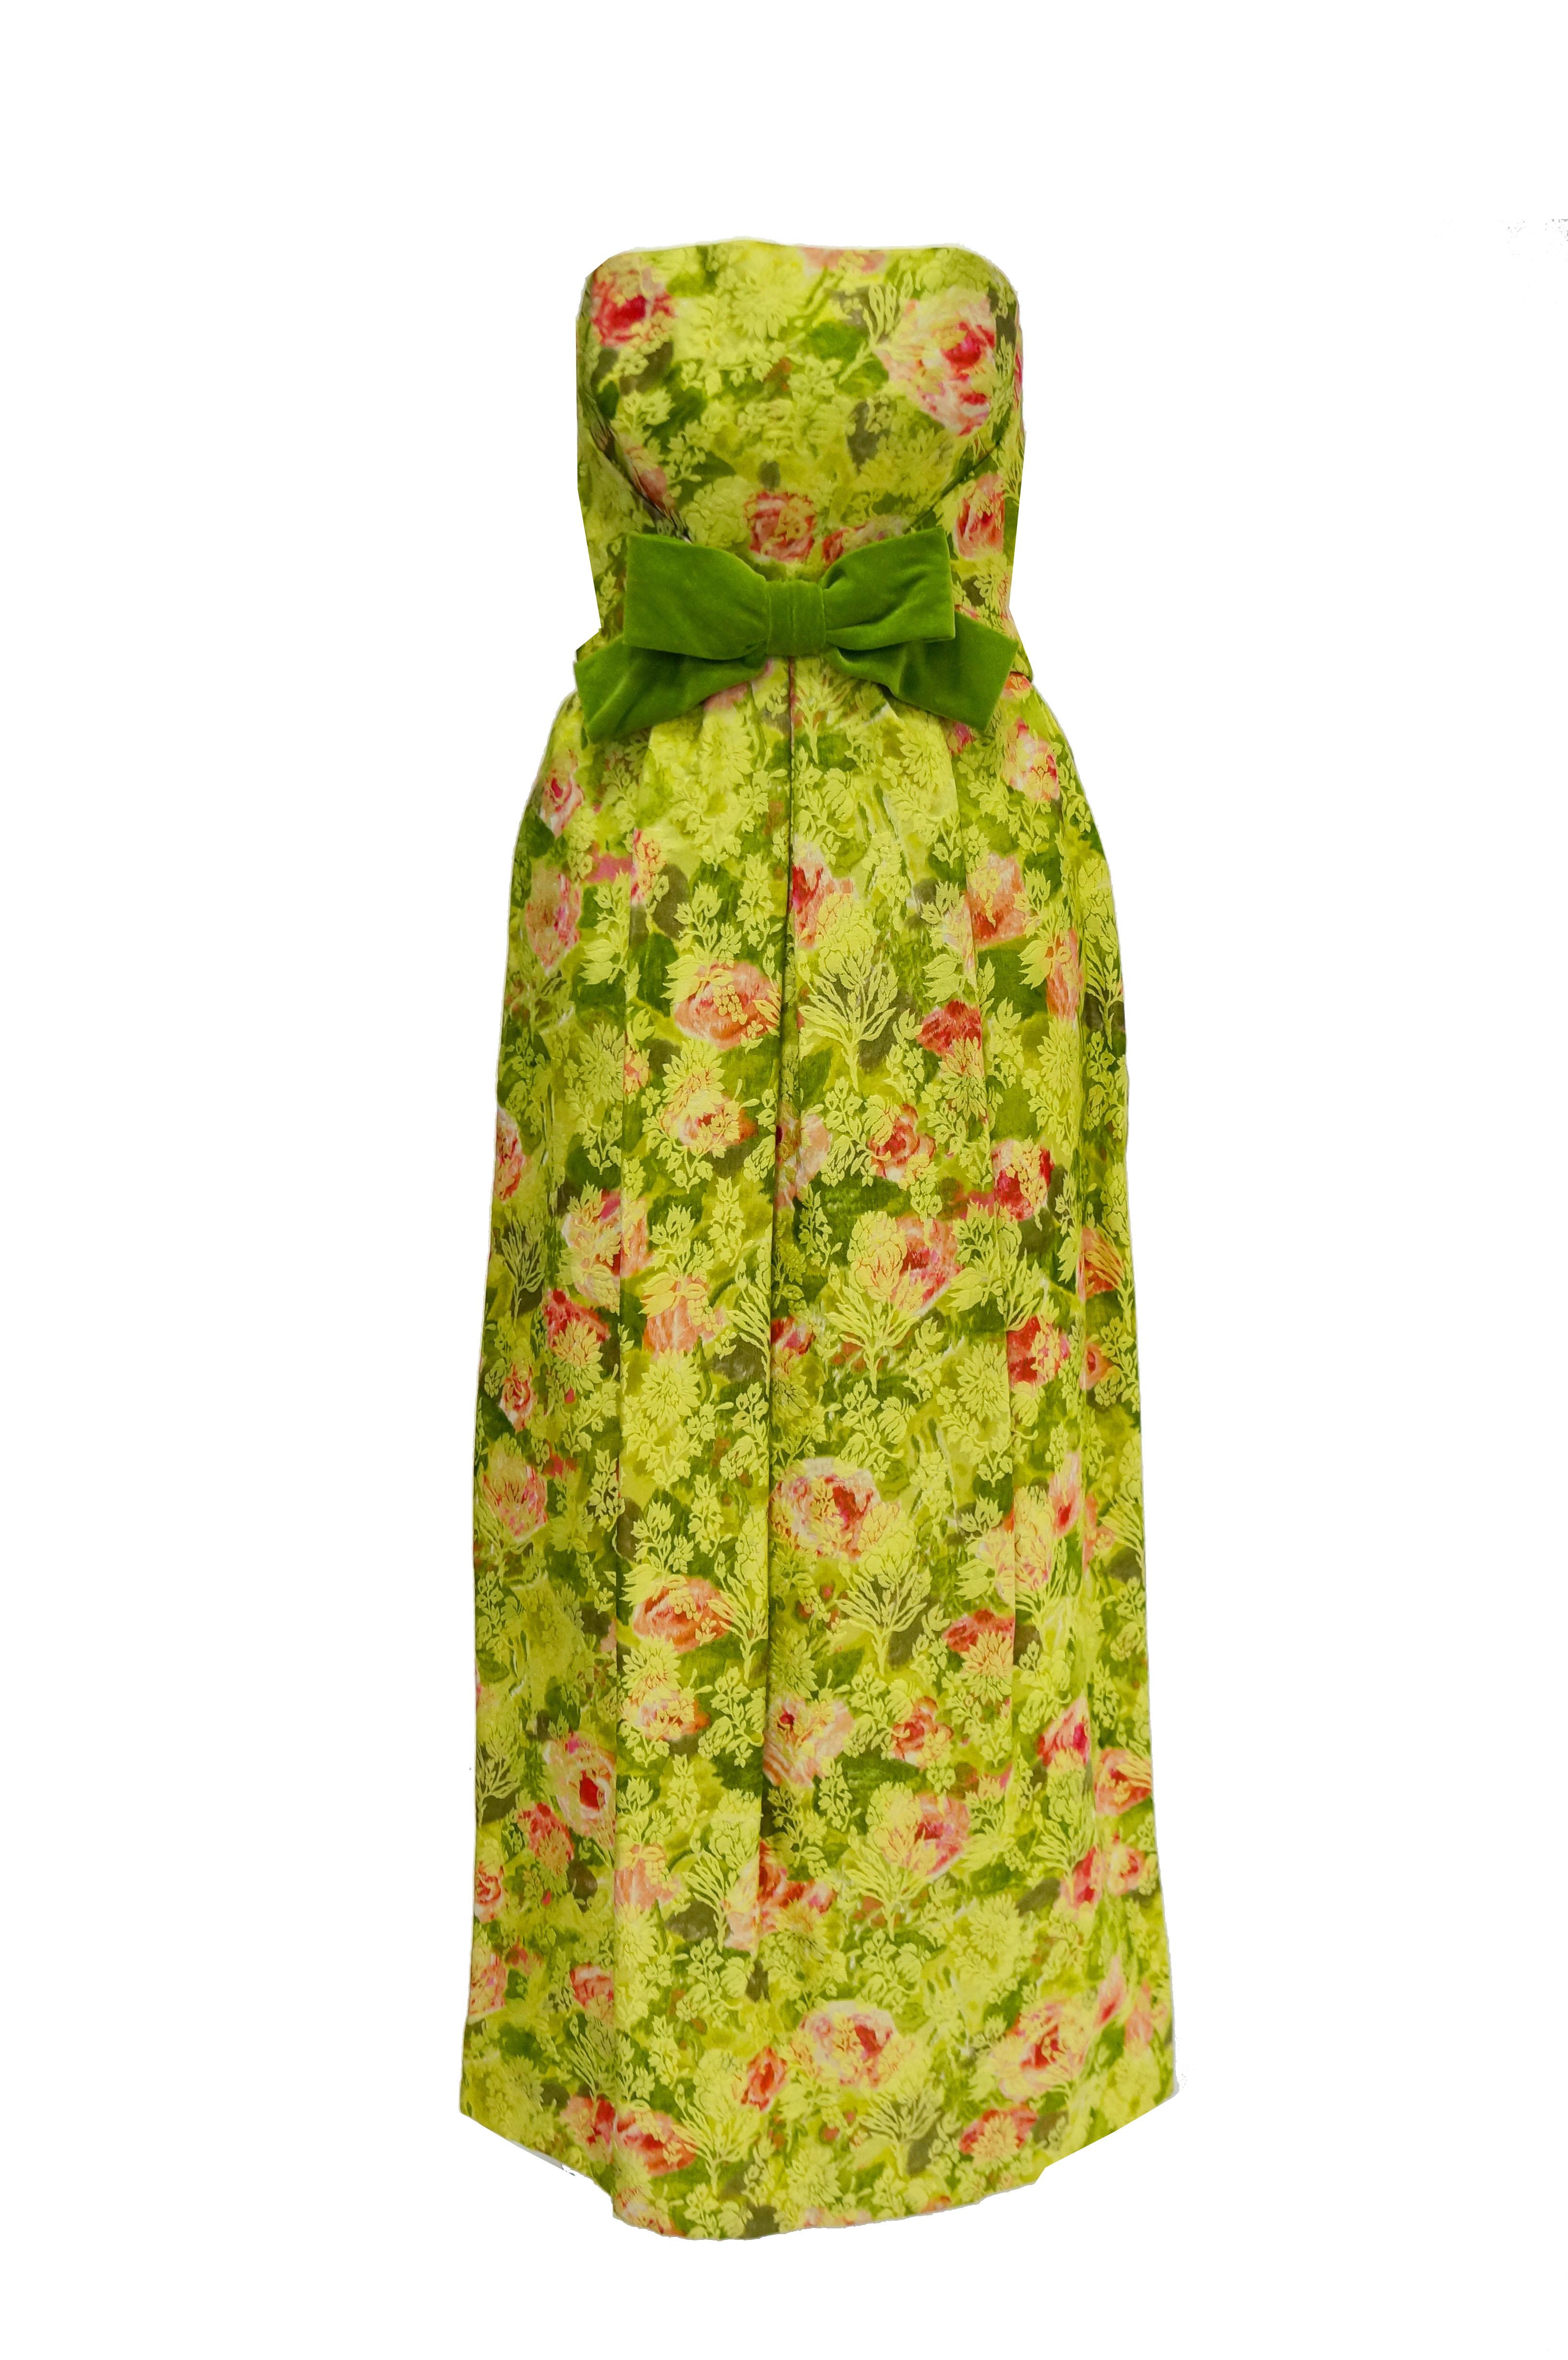 Picture perfect apple green empire waist evening dress by San Francisco's illustrious I. Magnin! This floor length gentle A - line evening dress features a pleated bust and cinched waist accented by a soft green velvet bow. The gorgeous pink